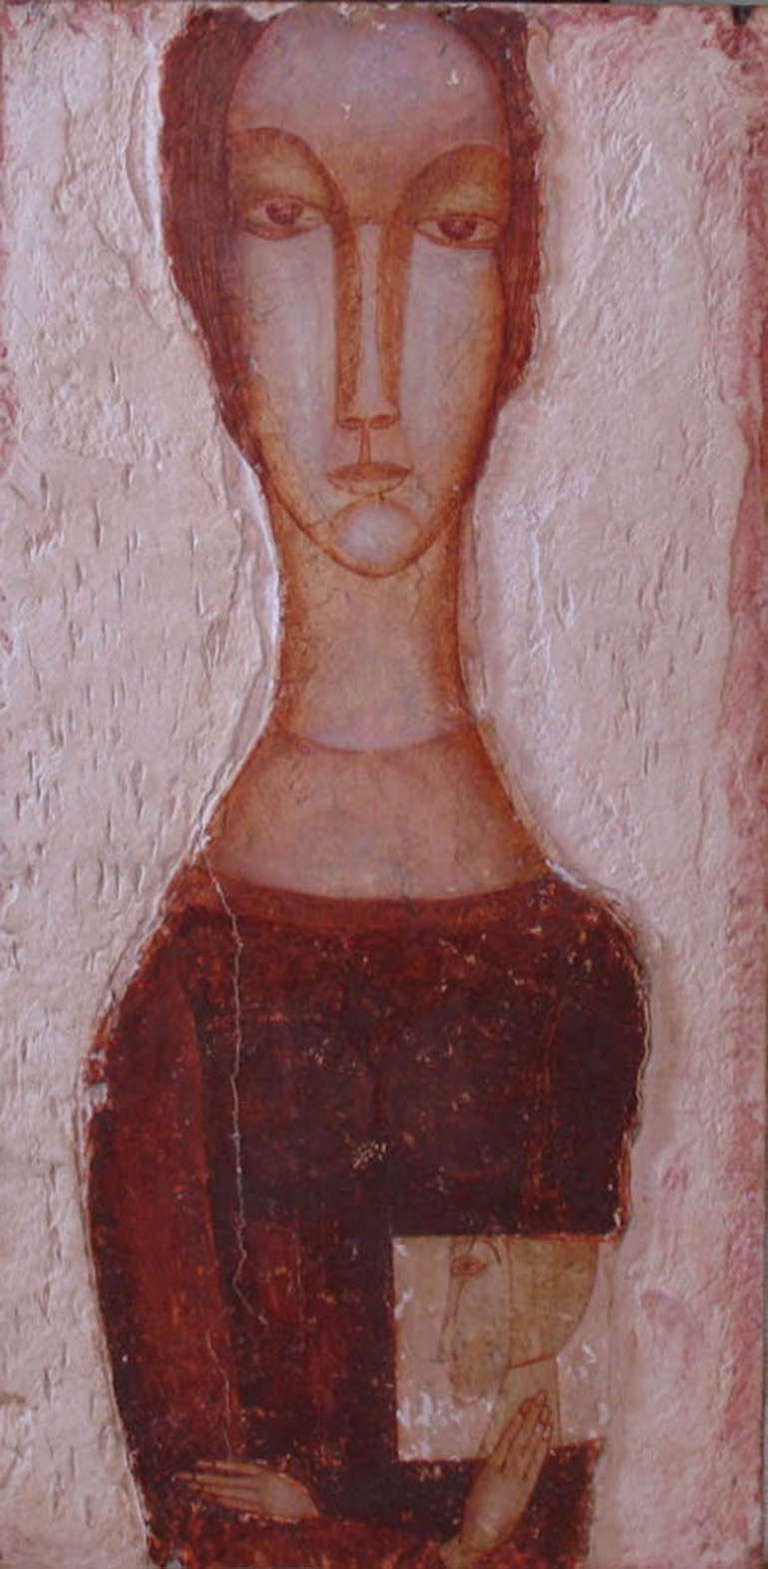 Original icon like portrait on panel by Adam Niemczyc. It employs a fresco like technique were plaster has been built up on a wood panel and then carved and painted.  This work is from the Iconostases series which featured paintings inspired by the